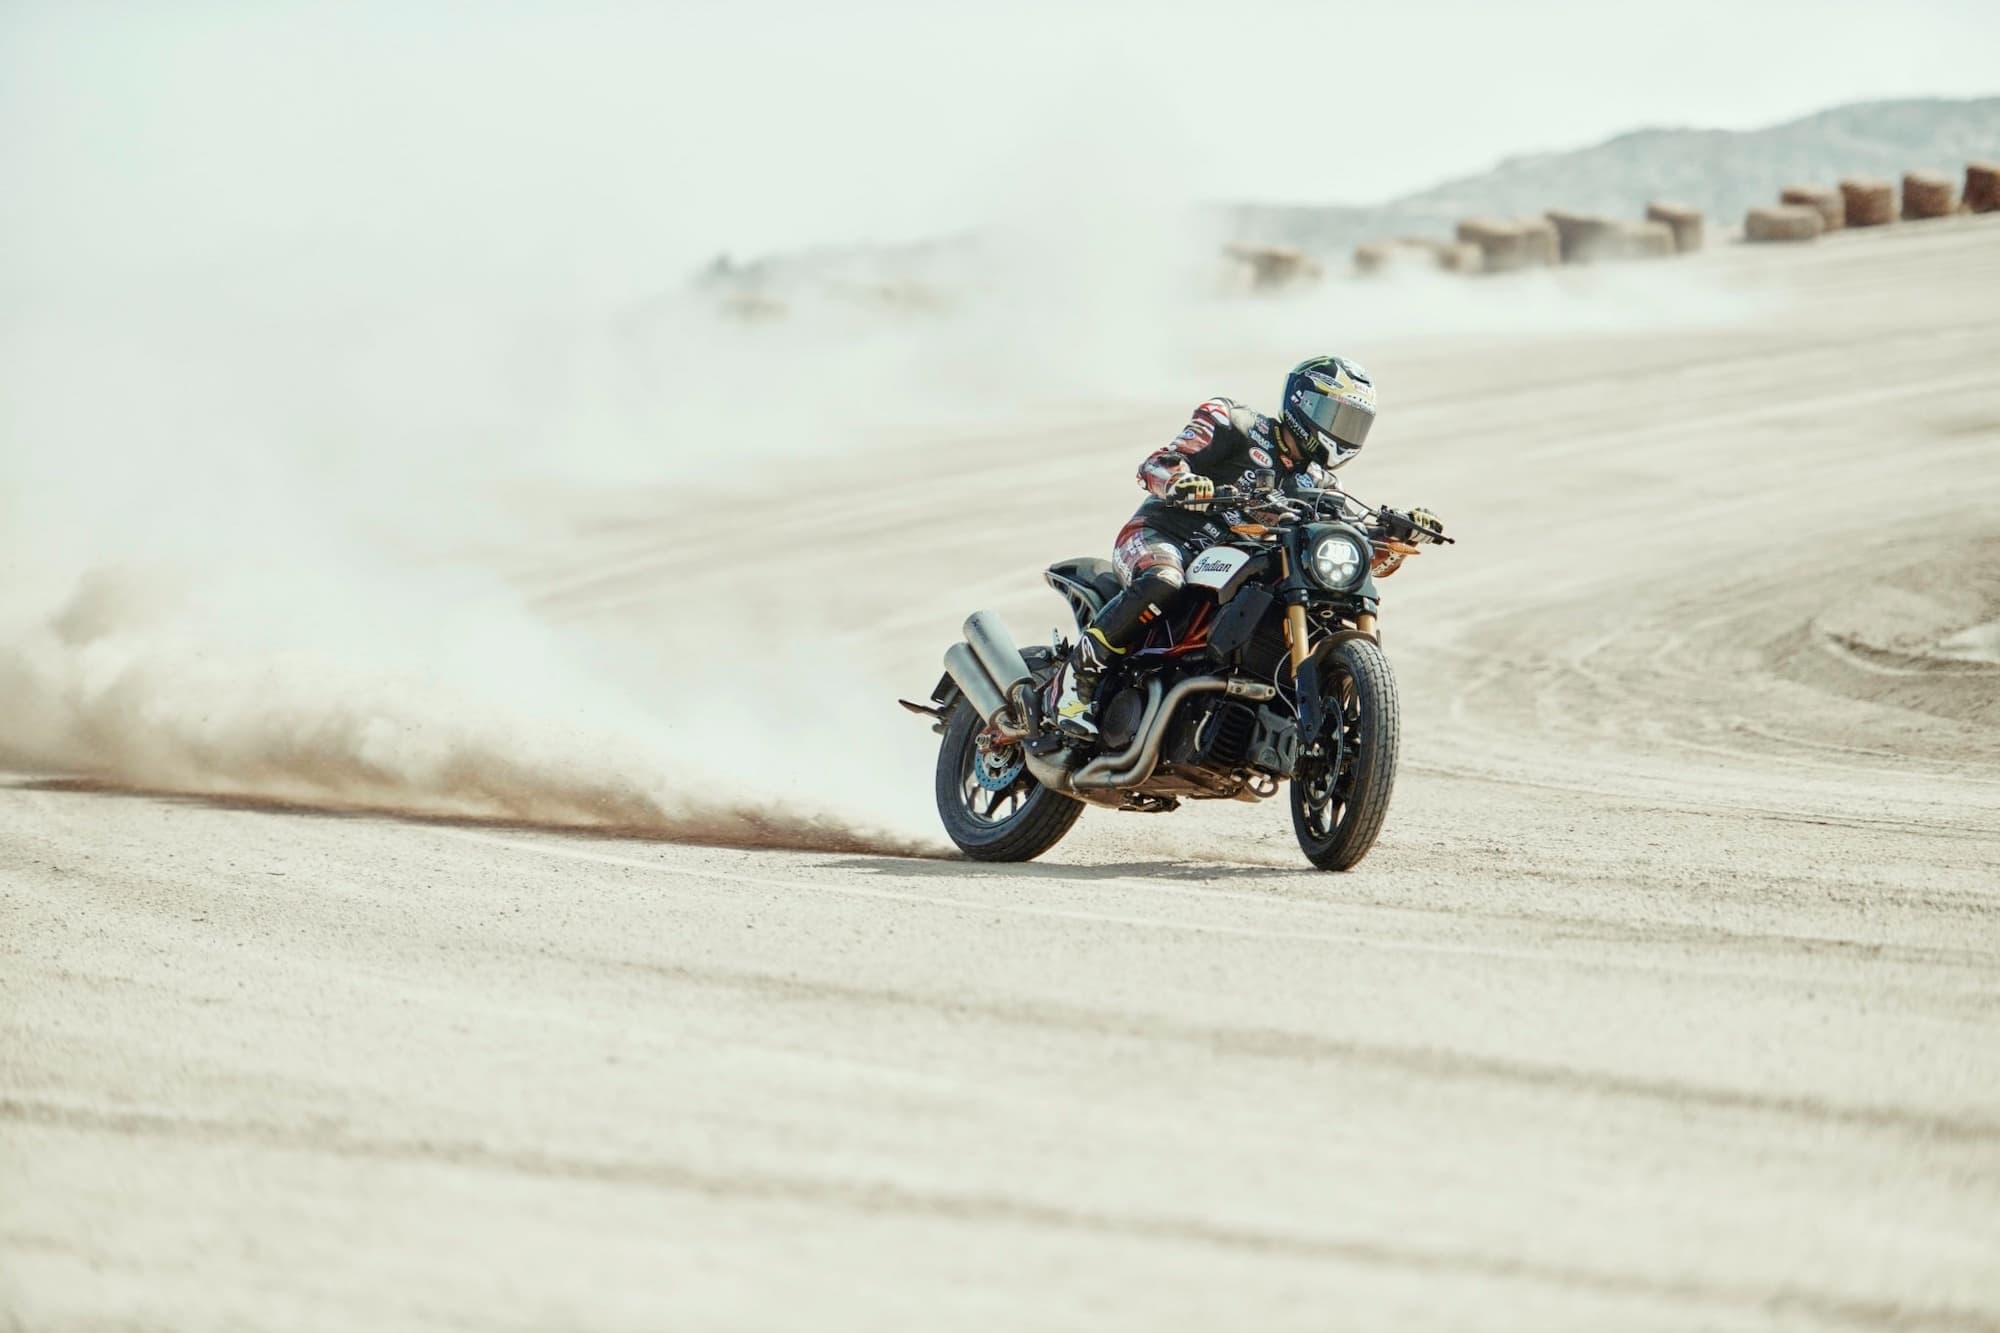 Riding the FTR 1200 S on dirt track